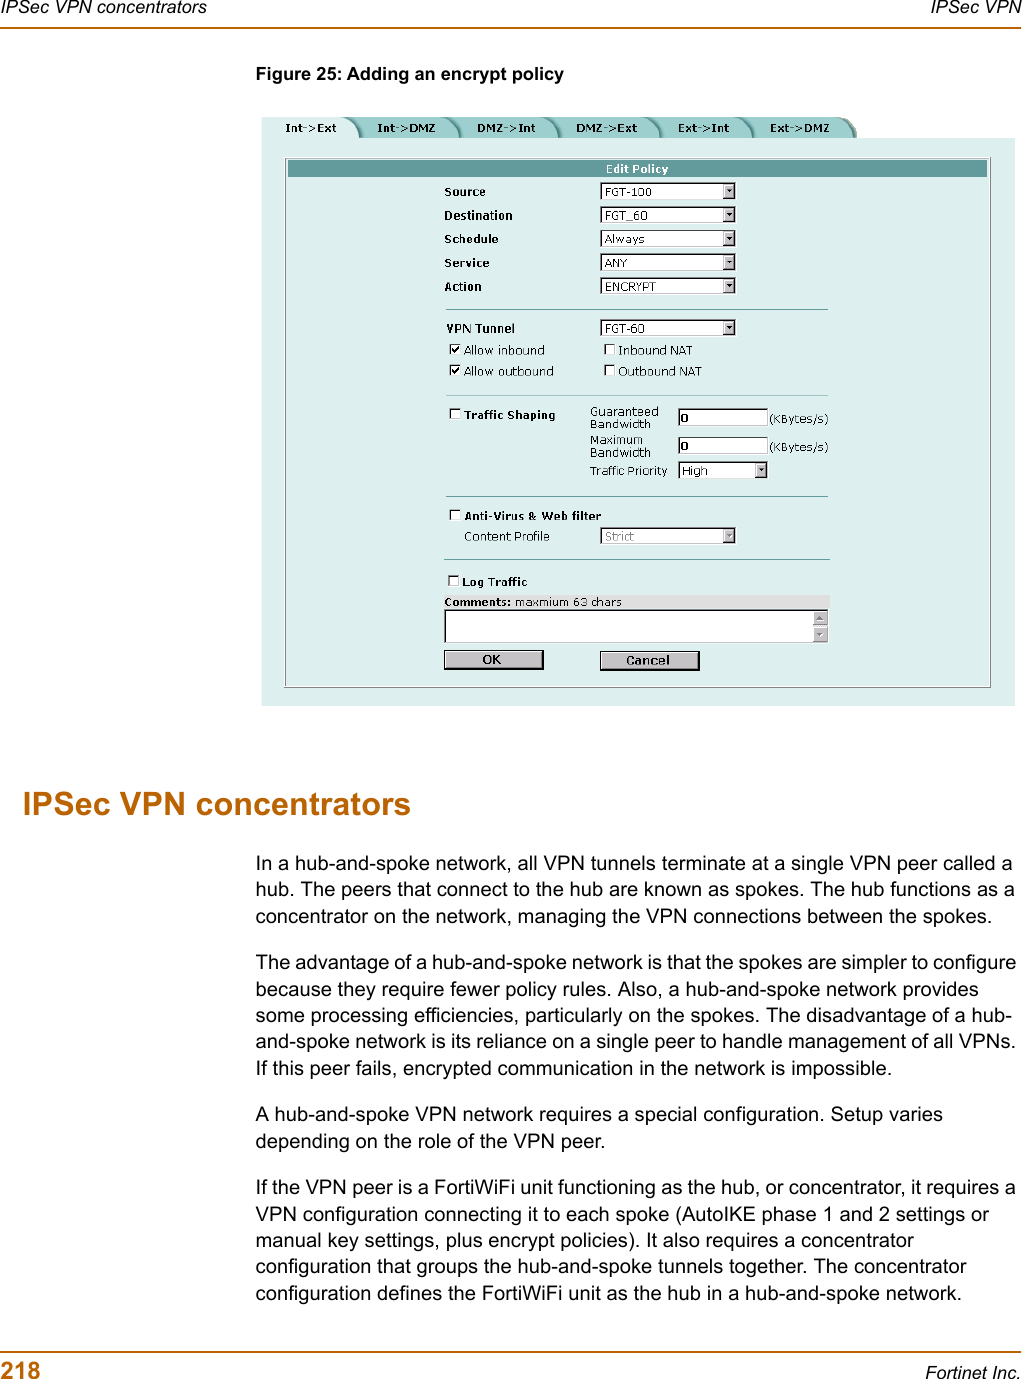 218 Fortinet Inc.IPSec VPN concentrators IPSec VPNFigure 25: Adding an encrypt policyIPSec VPN concentrators In a hub-and-spoke network, all VPN tunnels terminate at a single VPN peer called a hub. The peers that connect to the hub are known as spokes. The hub functions as a concentrator on the network, managing the VPN connections between the spokes.The advantage of a hub-and-spoke network is that the spokes are simpler to configure because they require fewer policy rules. Also, a hub-and-spoke network provides some processing efficiencies, particularly on the spokes. The disadvantage of a hub-and-spoke network is its reliance on a single peer to handle management of all VPNs. If this peer fails, encrypted communication in the network is impossible.A hub-and-spoke VPN network requires a special configuration. Setup varies depending on the role of the VPN peer.If the VPN peer is a FortiWiFi unit functioning as the hub, or concentrator, it requires a VPN configuration connecting it to each spoke (AutoIKE phase 1 and 2 settings or manual key settings, plus encrypt policies). It also requires a concentrator configuration that groups the hub-and-spoke tunnels together. The concentrator configuration defines the FortiWiFi unit as the hub in a hub-and-spoke network.